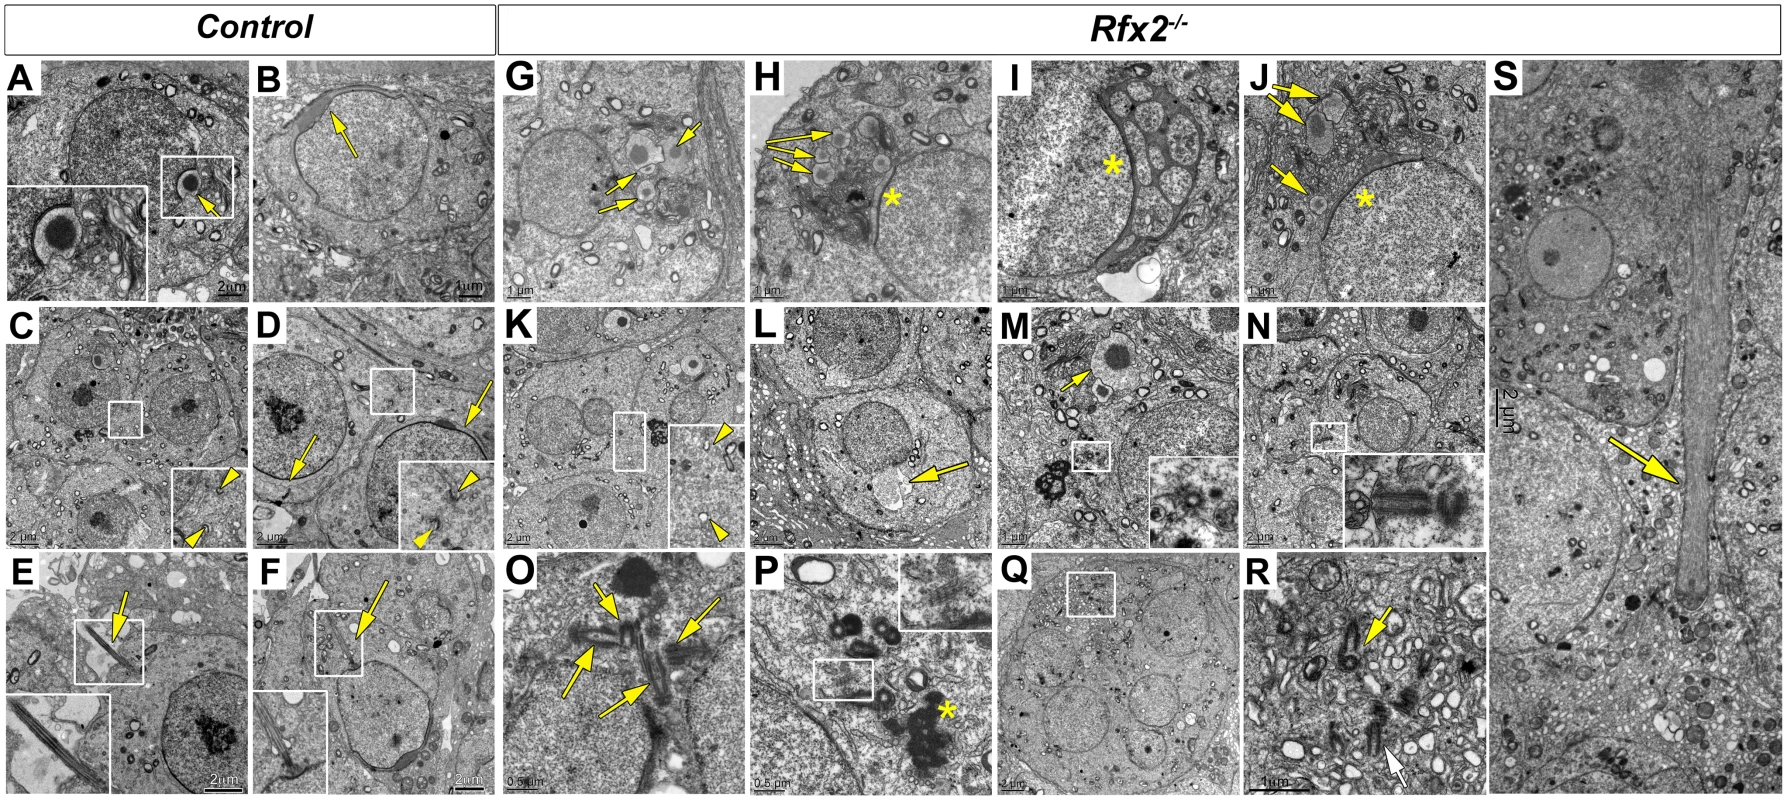 Ultrastructural defects and perturbed Golgi organization in <i>Rfx2</i><sup><i>-/-</i></sup> testes.